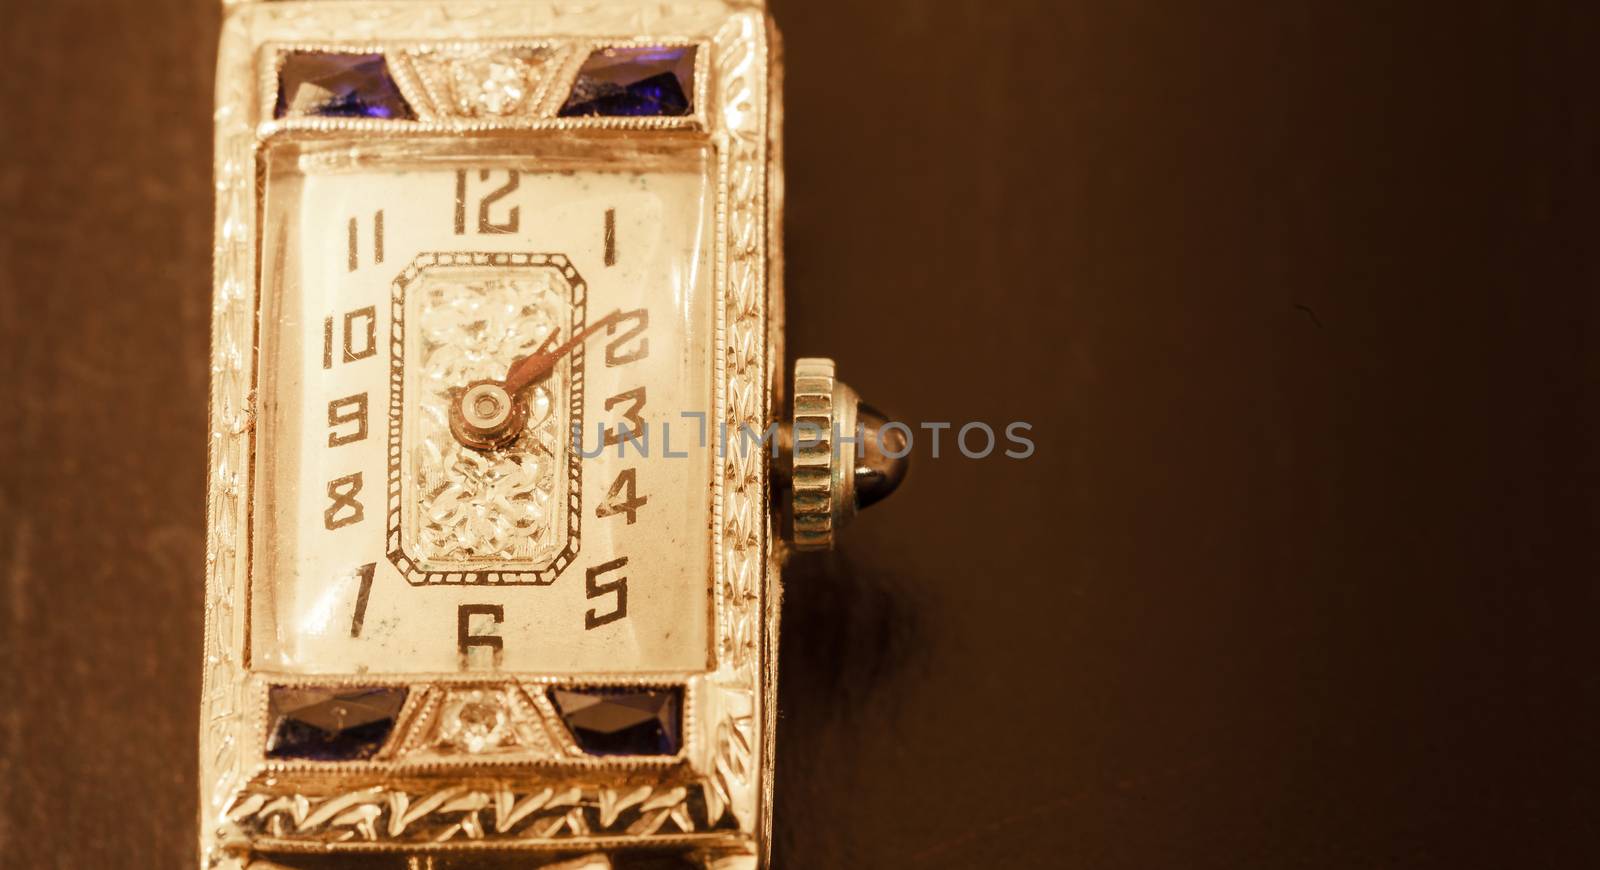 Antique luxury woman’s platinum watch with diamonds and sapphires on a black background